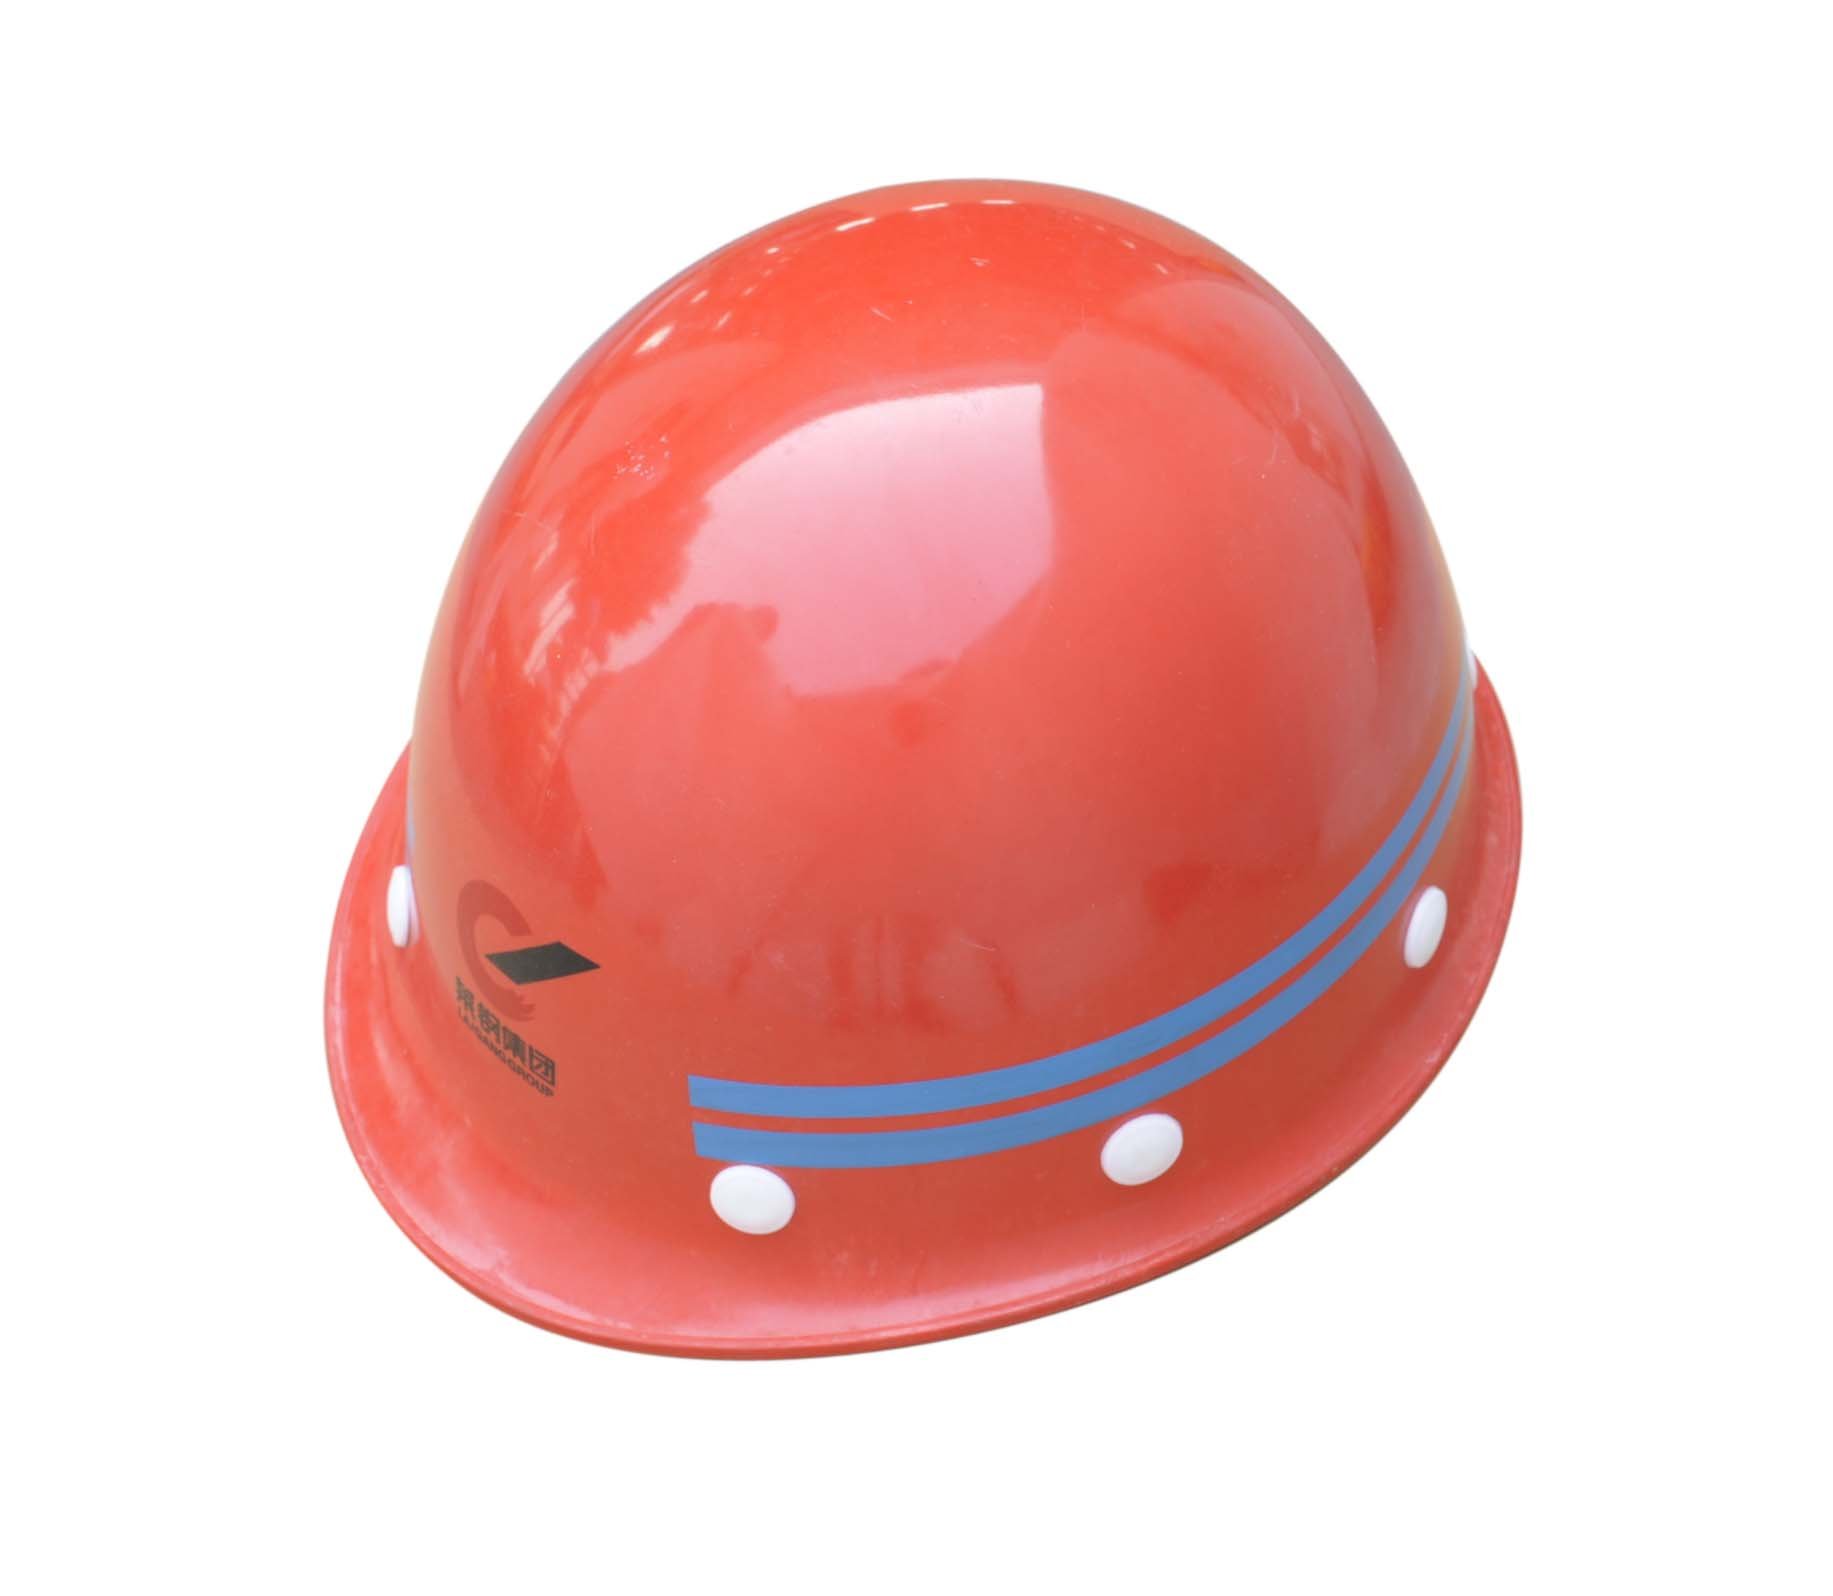 Safety Helmet Pictures